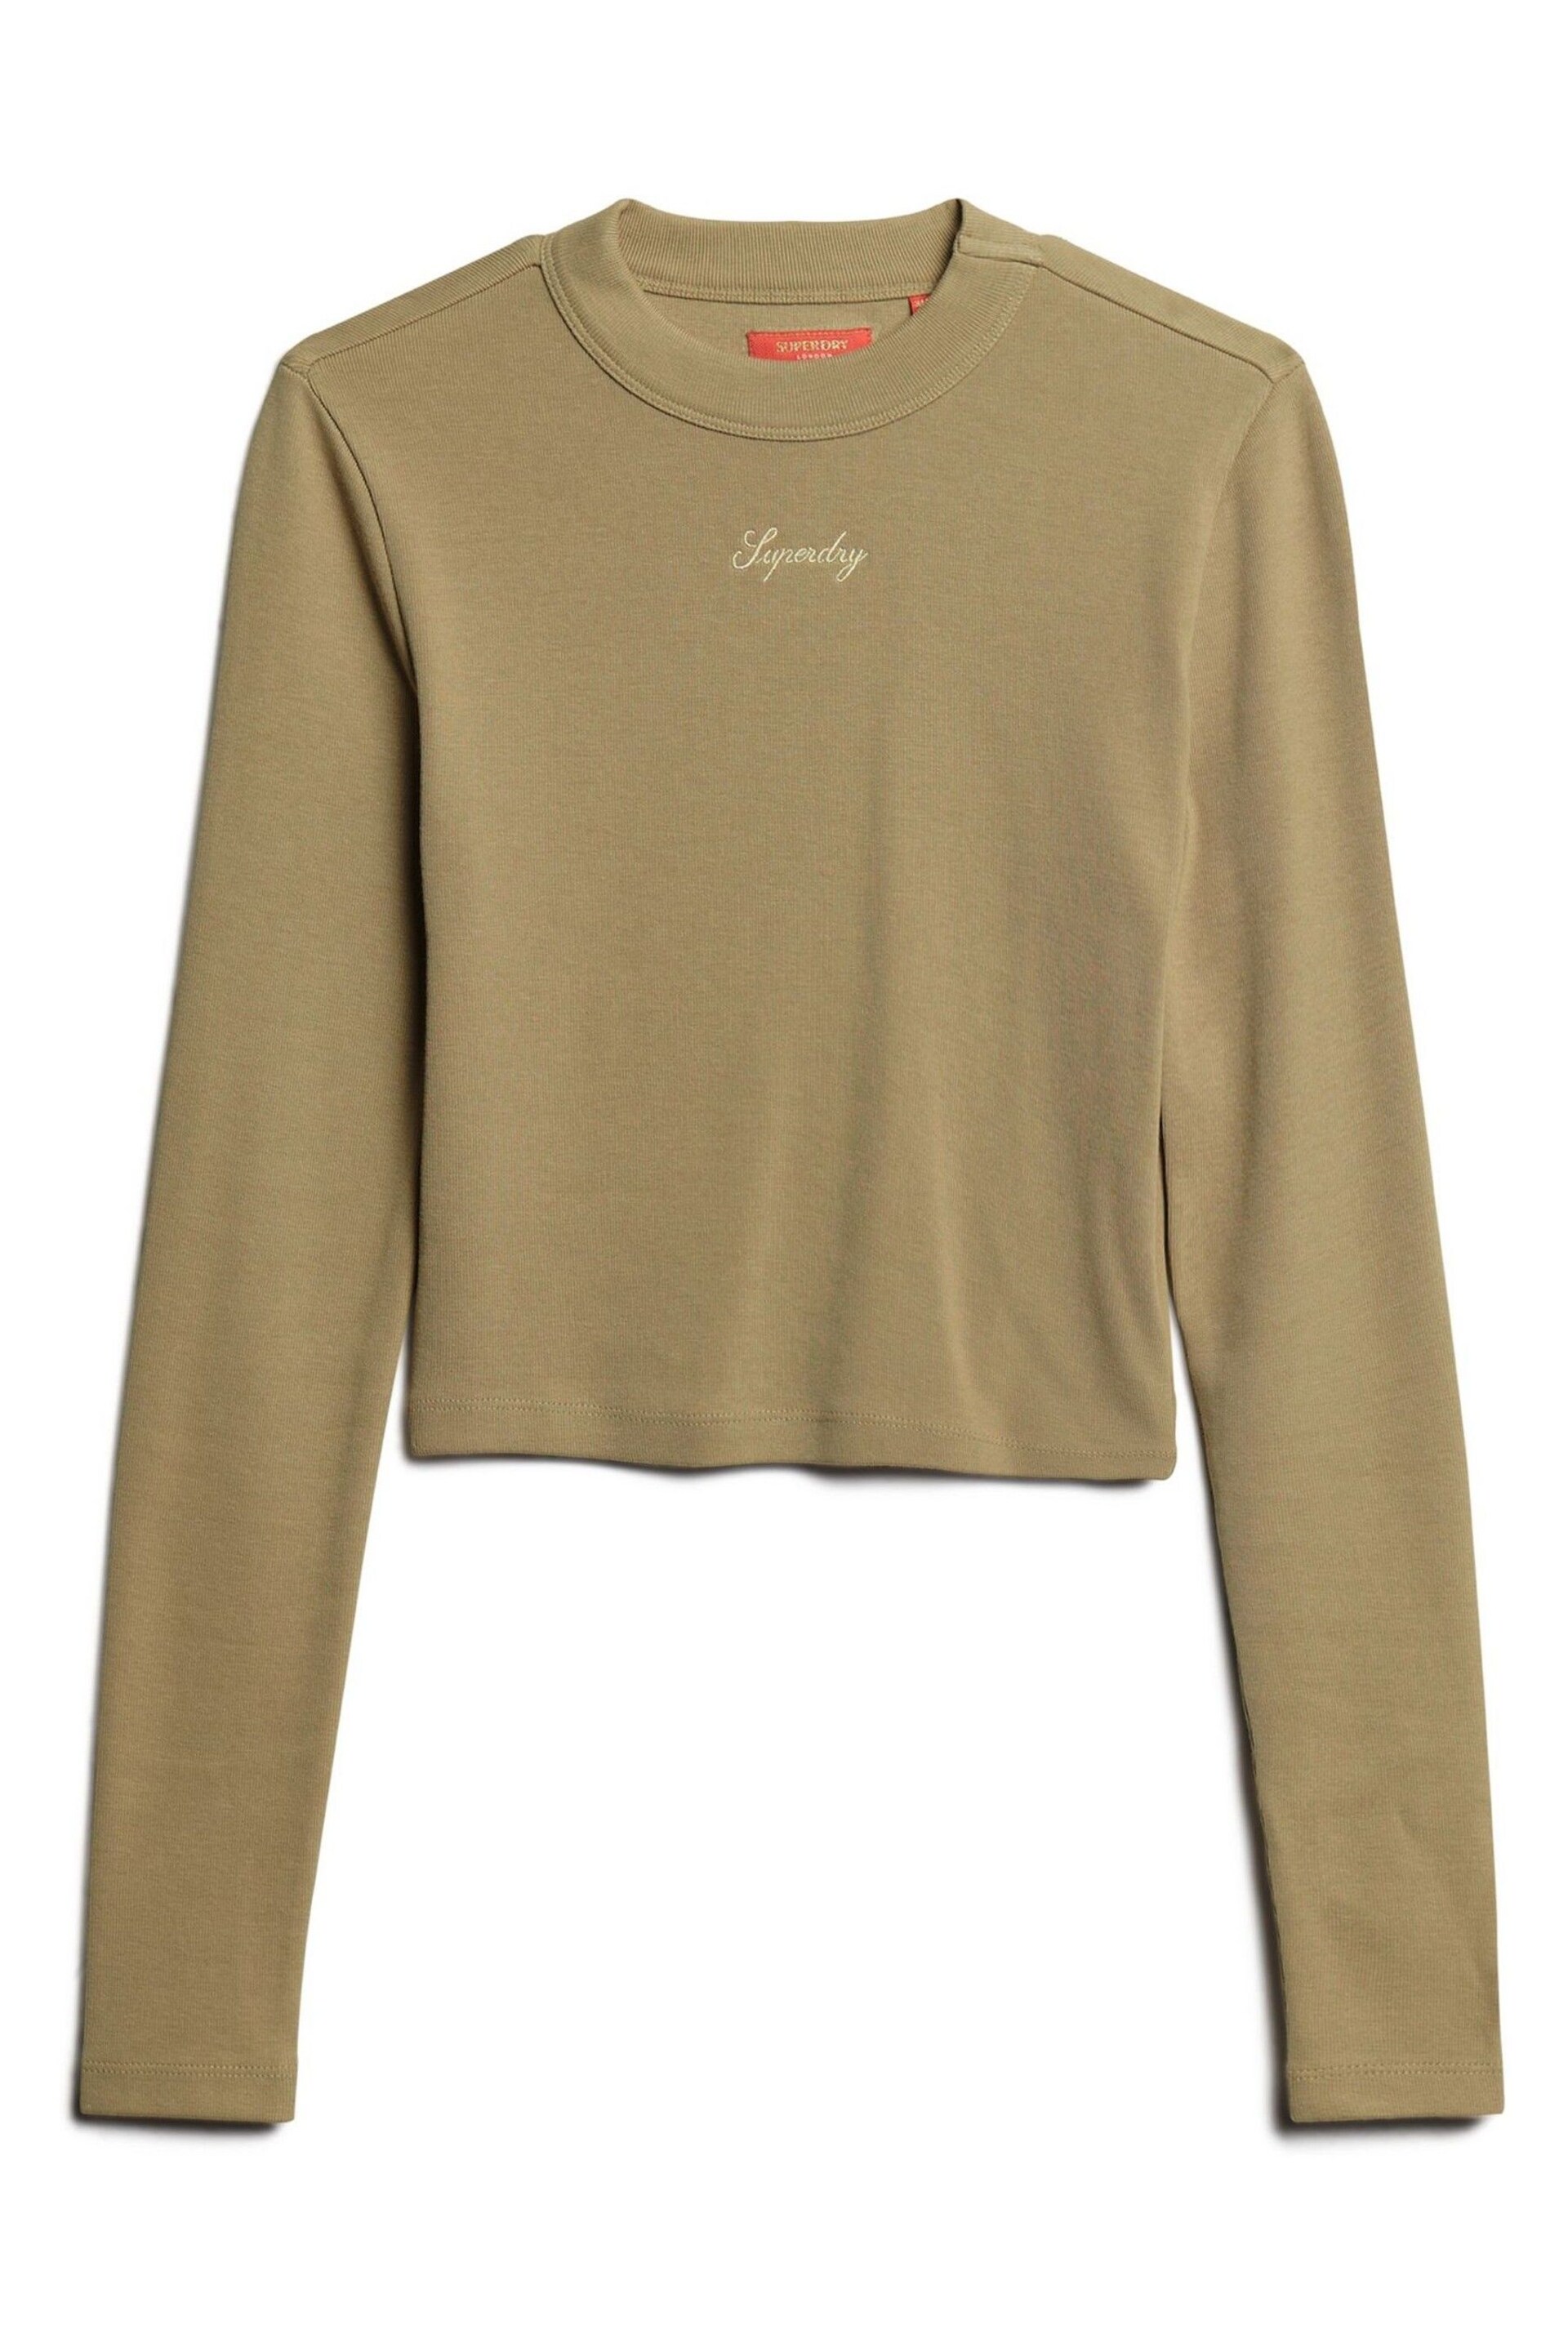 Superdry Green Rib Long Sleeve Fitted Top - Image 4 of 6